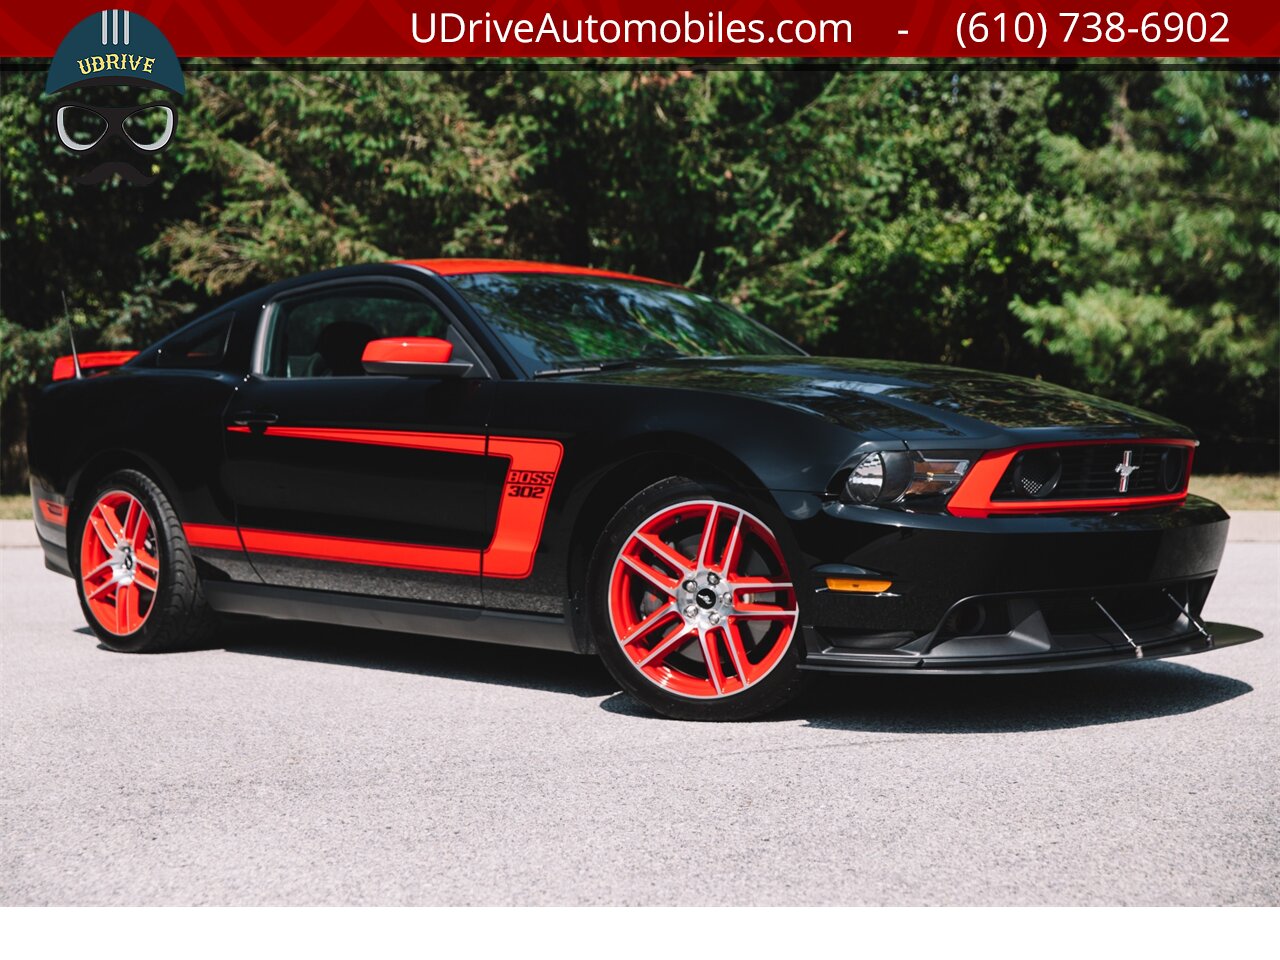 2012 Ford Mustang 866 Miles Boss 302 Laguna Seca #338 of 750  Red TracKey Activated - Photo 3 - West Chester, PA 19382